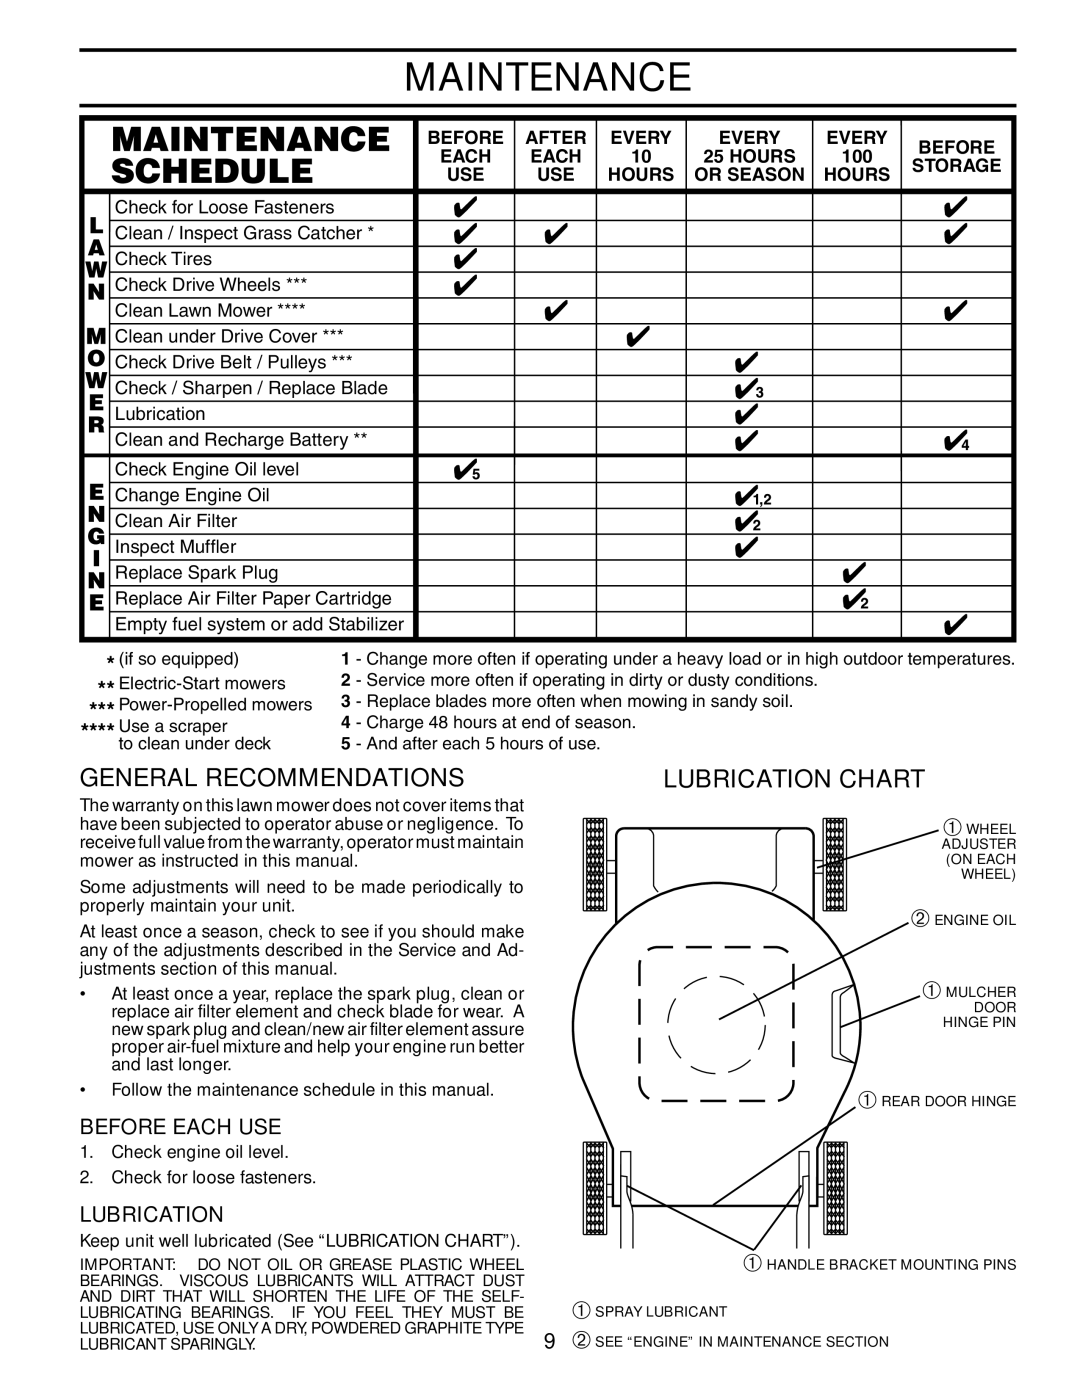 Husqvarna 532424698 Maintenance, General Recommendations, Lubrication Chart, Before Each Use, After, Every, Storage, Hours 